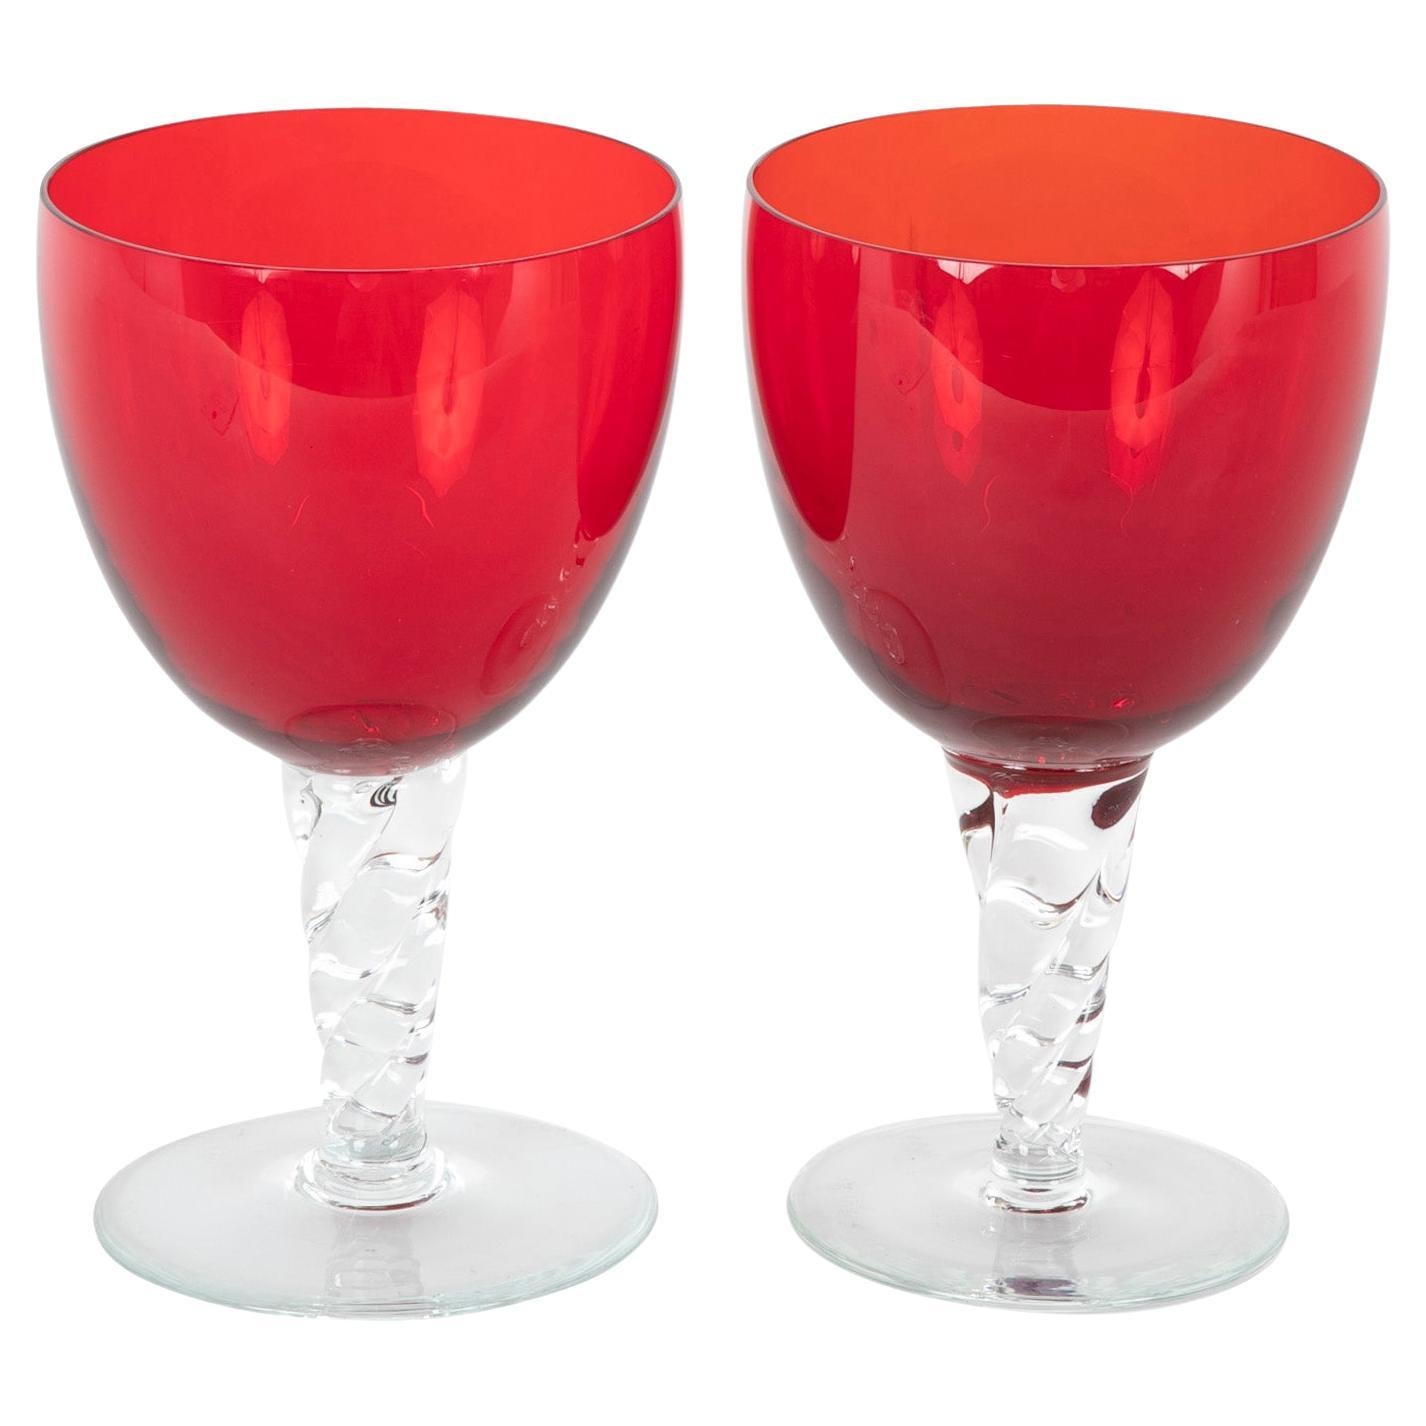 Festive set of 12 red crystal with clear stem goblets. Made in the USA.